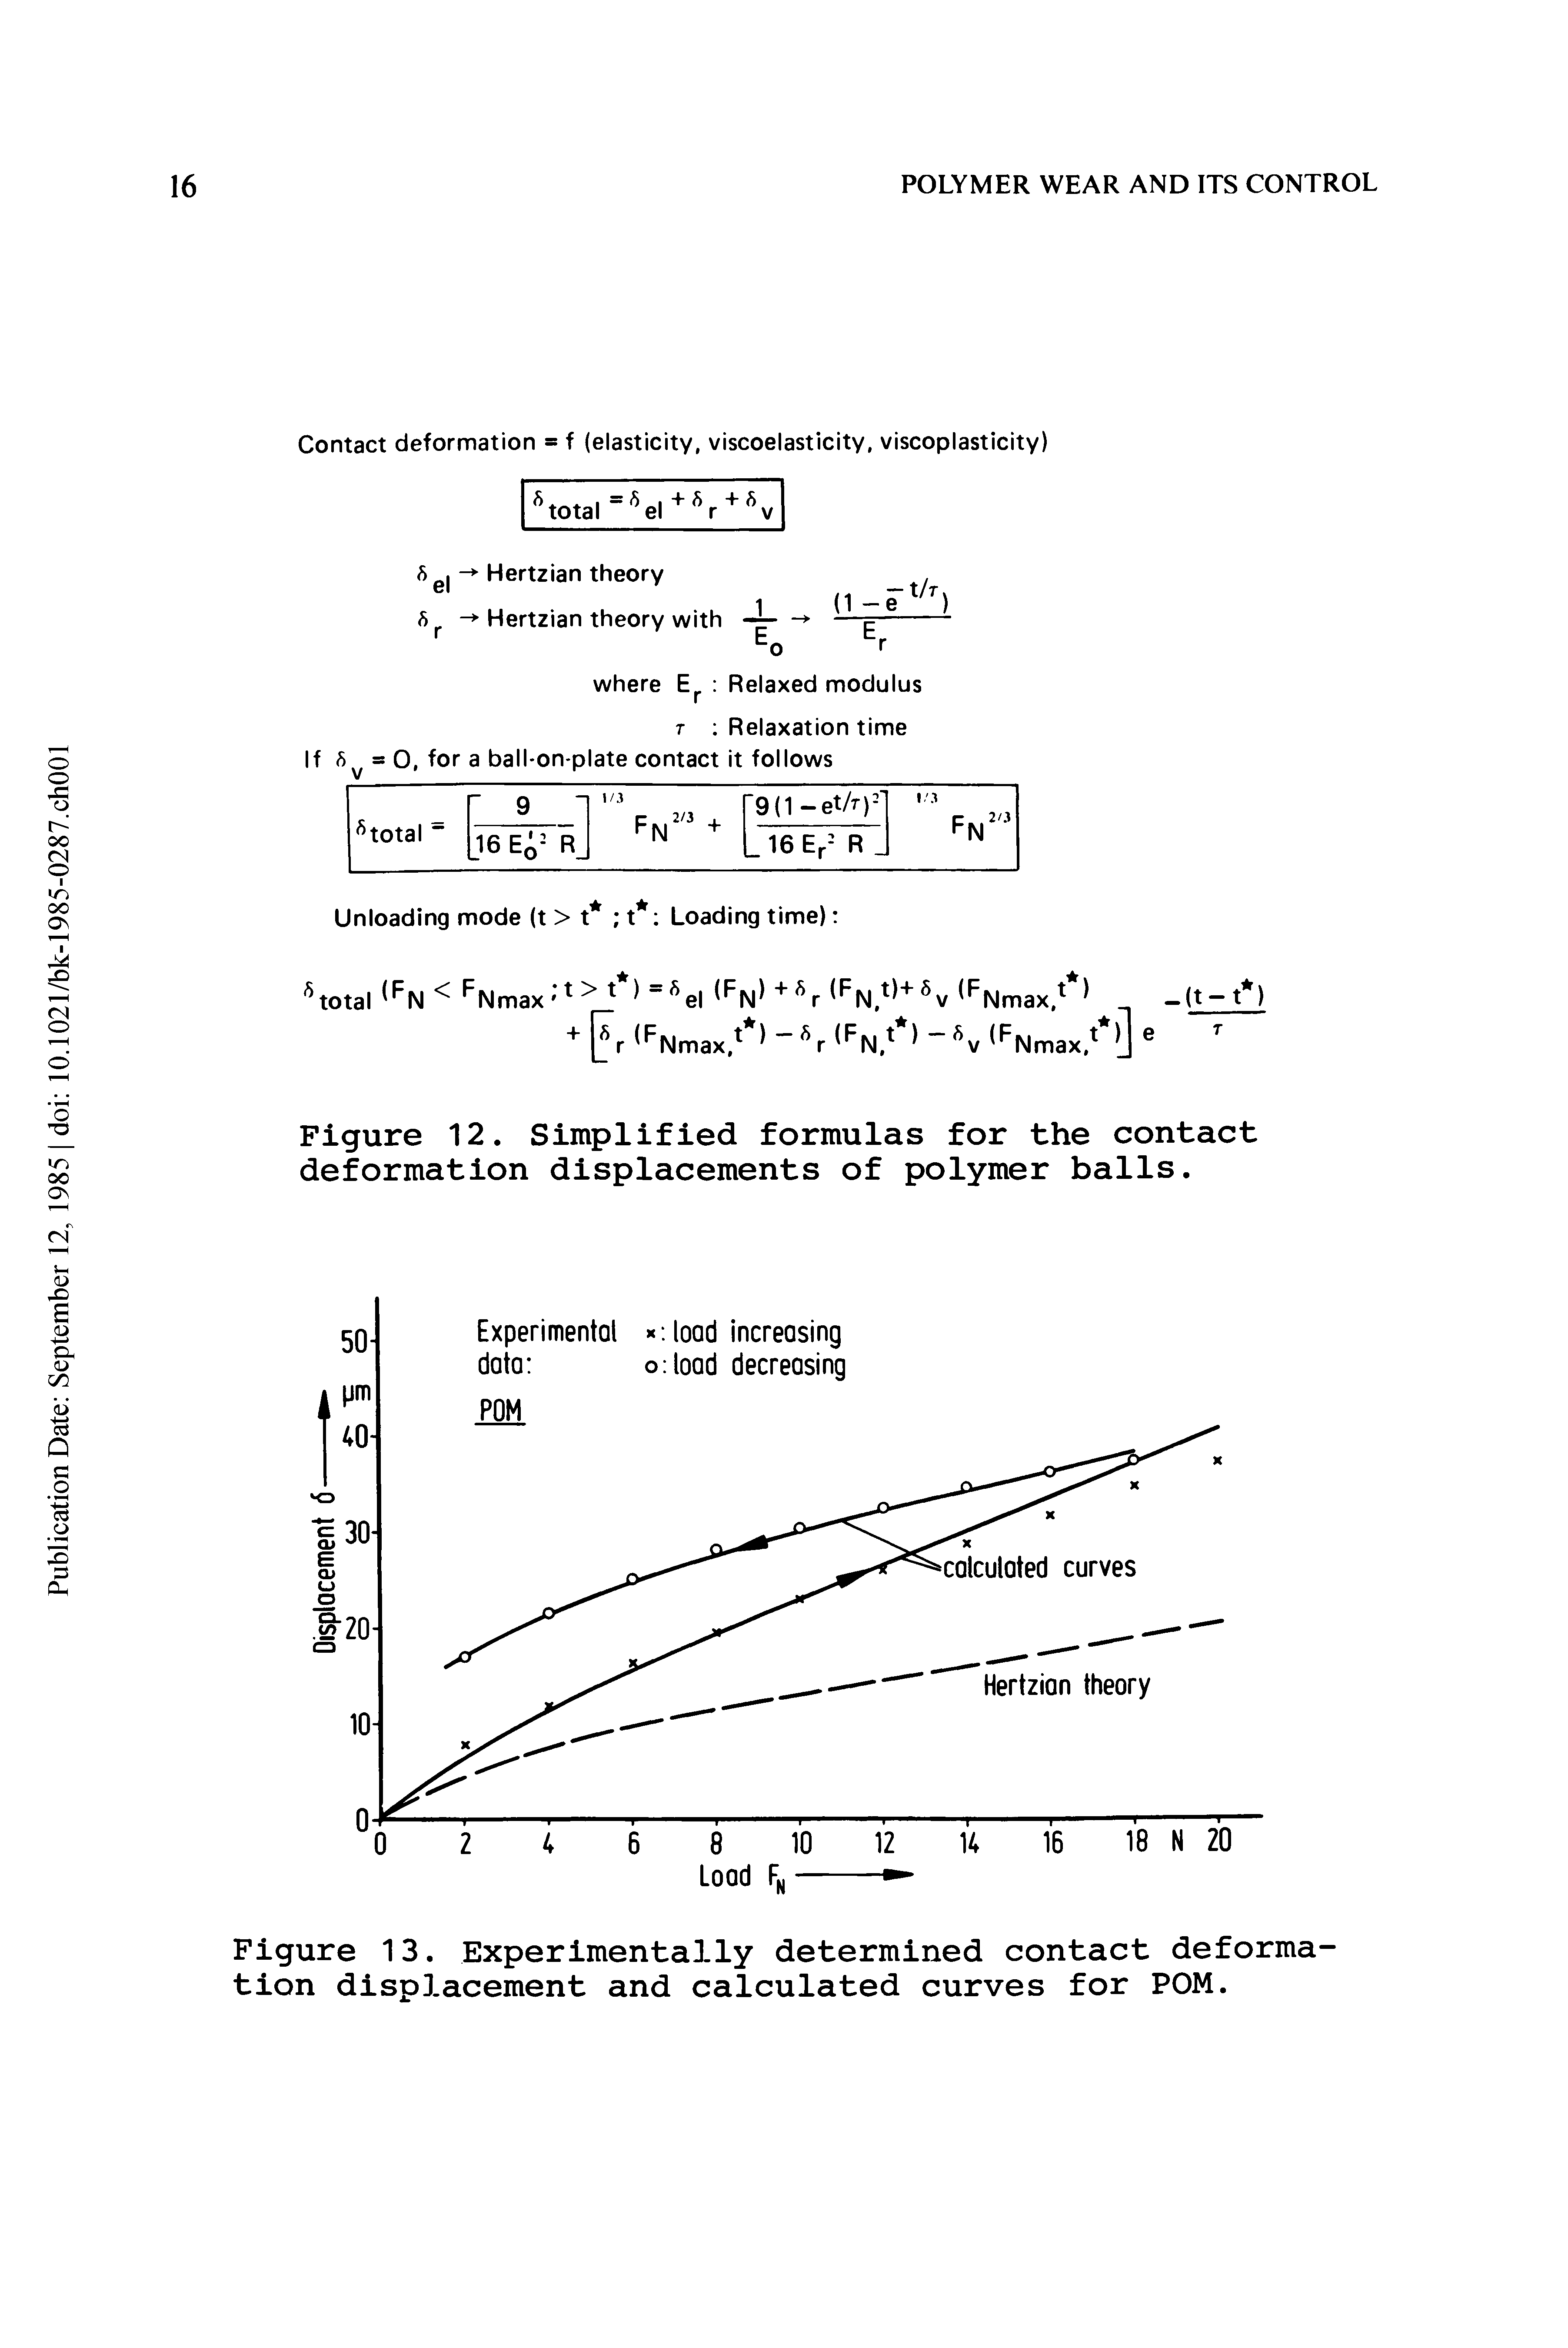 Figure 13. Experimentally determined contact deformation displacement and calculated curves for POM.